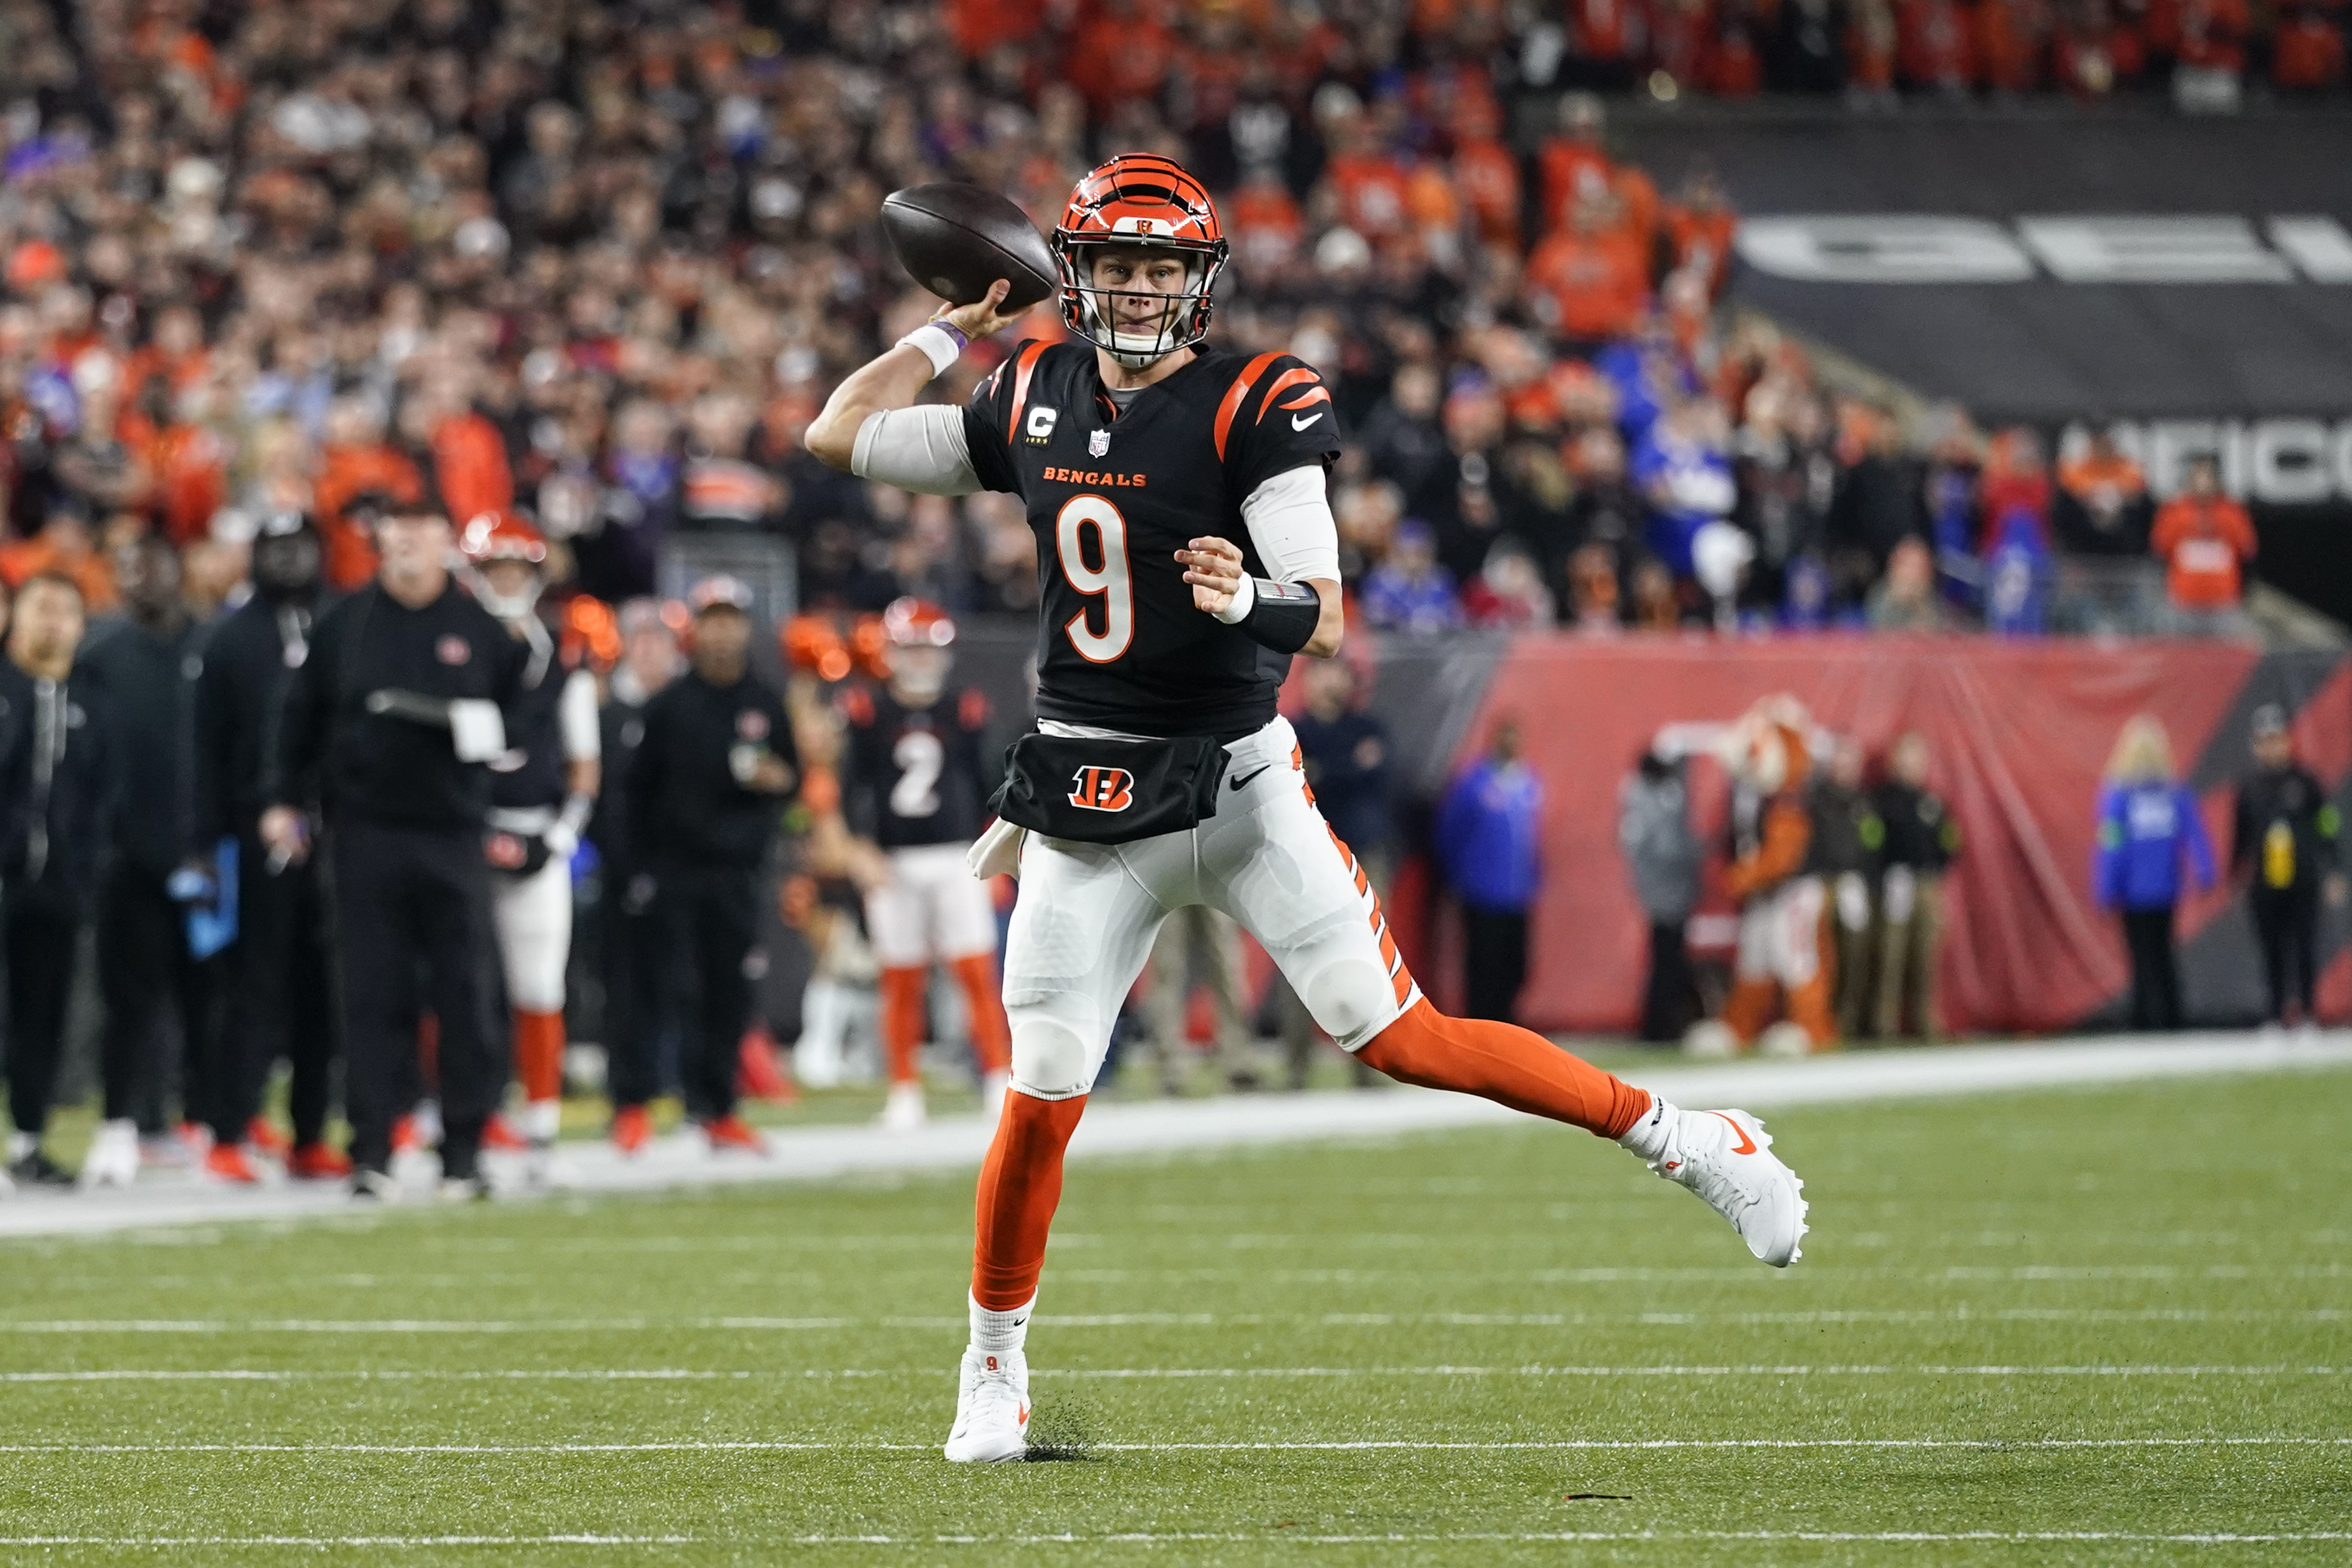 Jake Browning continues hot streak, rallies Bengals to 27-24 win